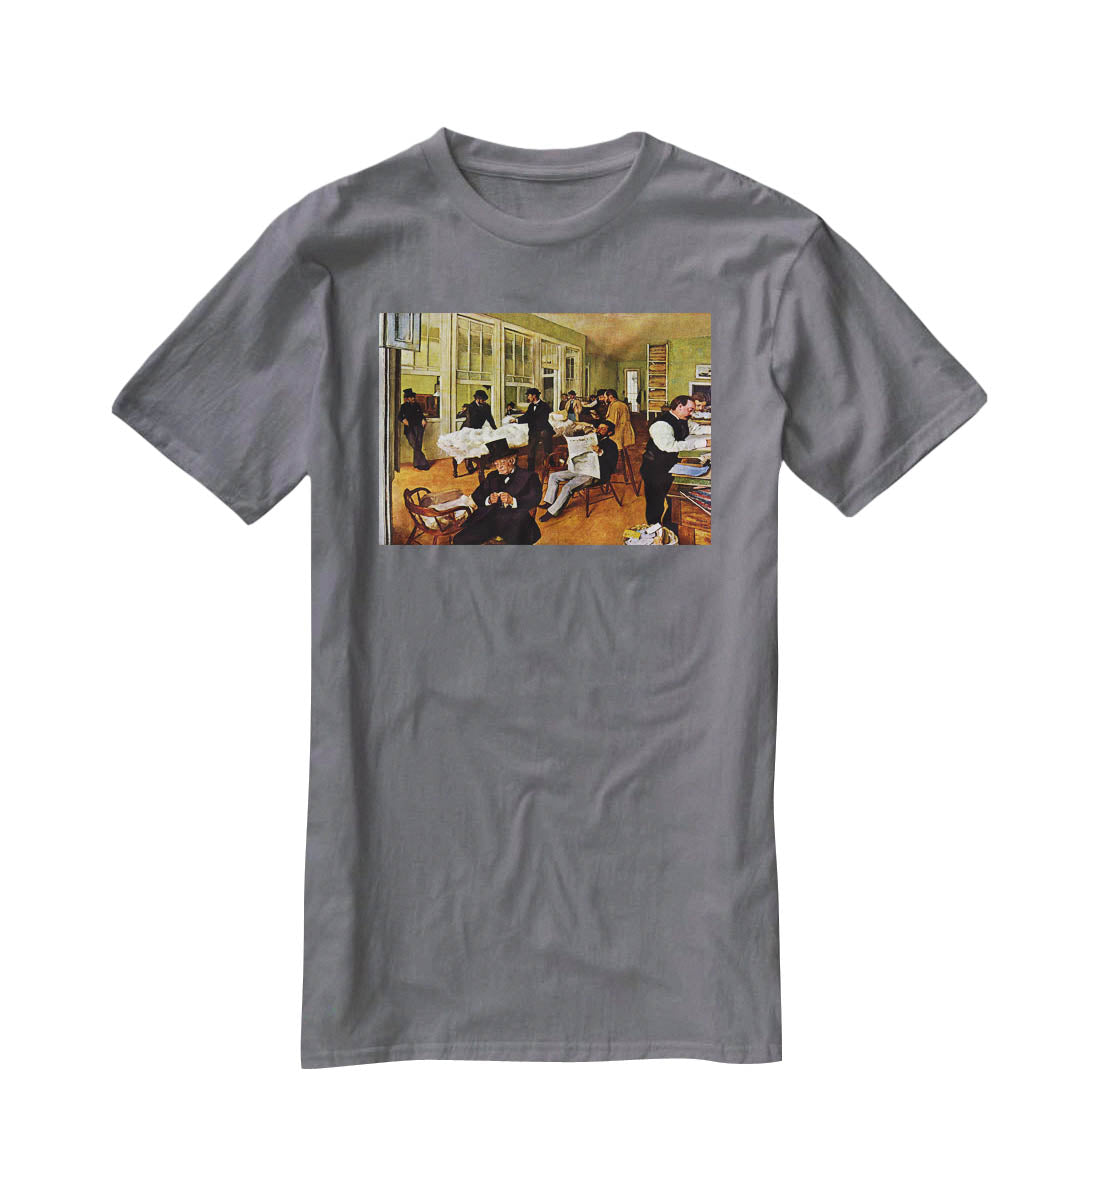 The cotton office in New Orleans by Degas T-Shirt - Canvas Art Rocks - 3